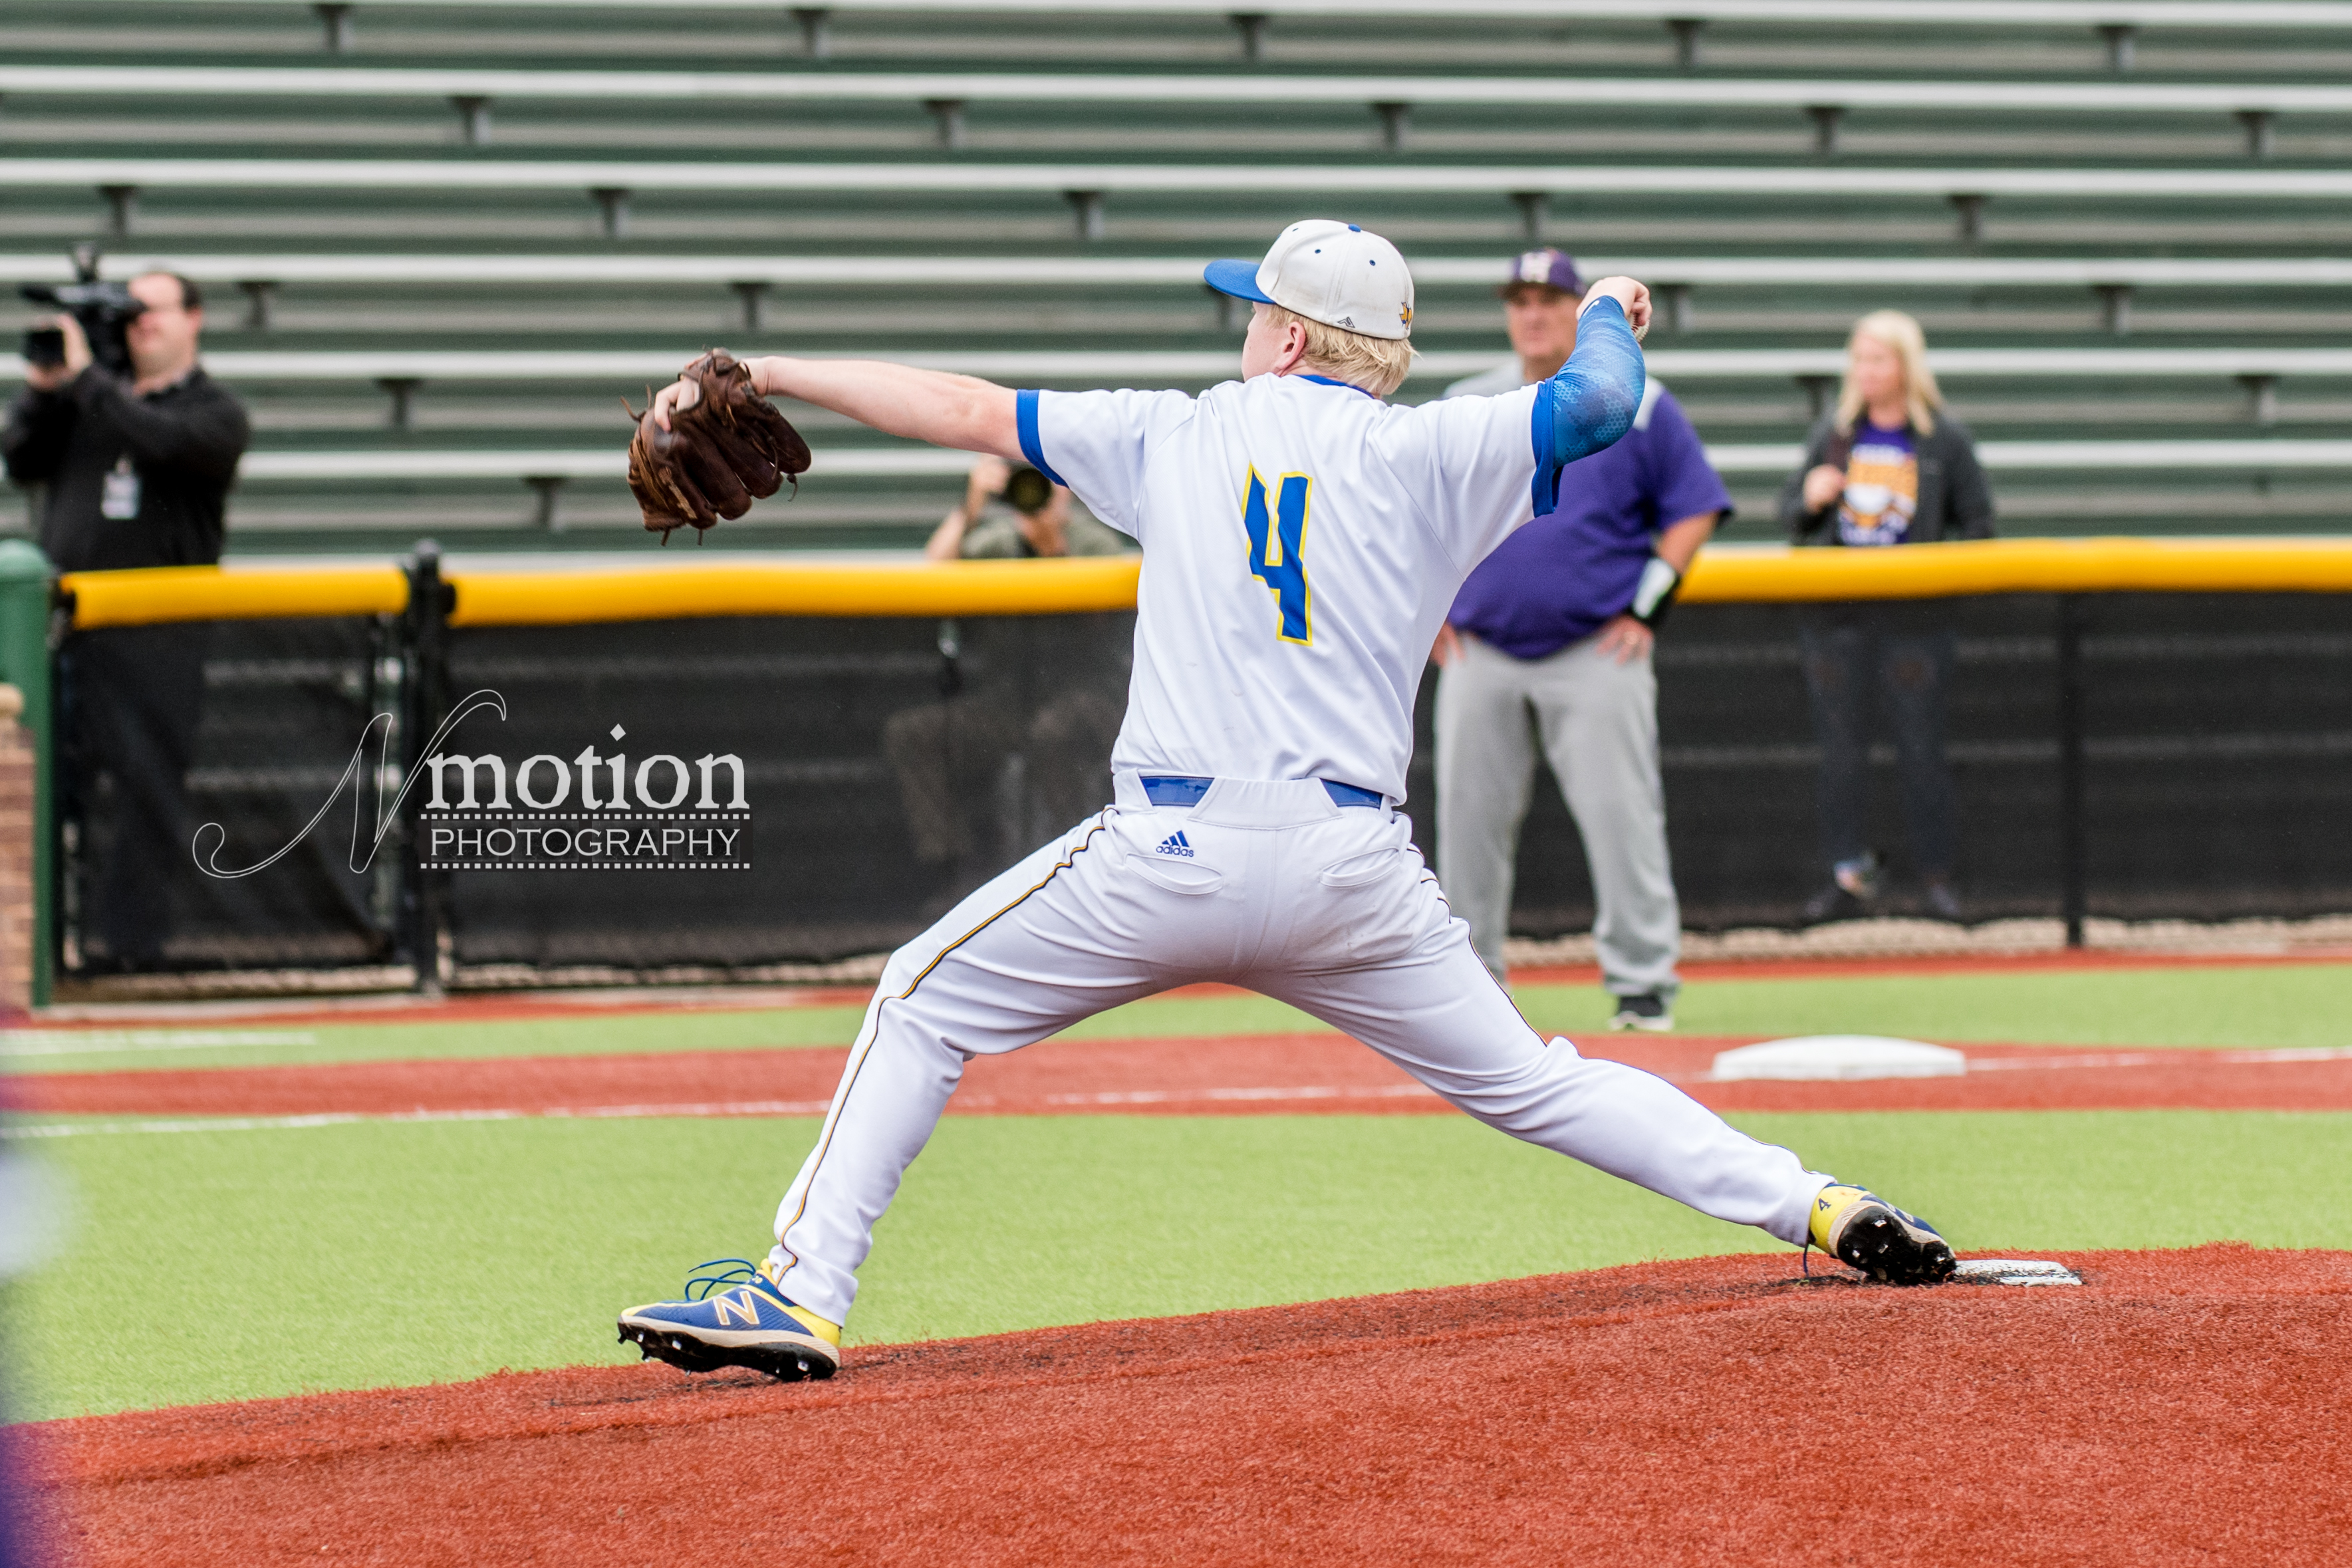 Photos from Sulphur Springs Wildcats Baseball’s 4-3 win in Game 2 of their Bi-District series sweep of Hallsville by Cathy Bryan of Nmotion Photography!